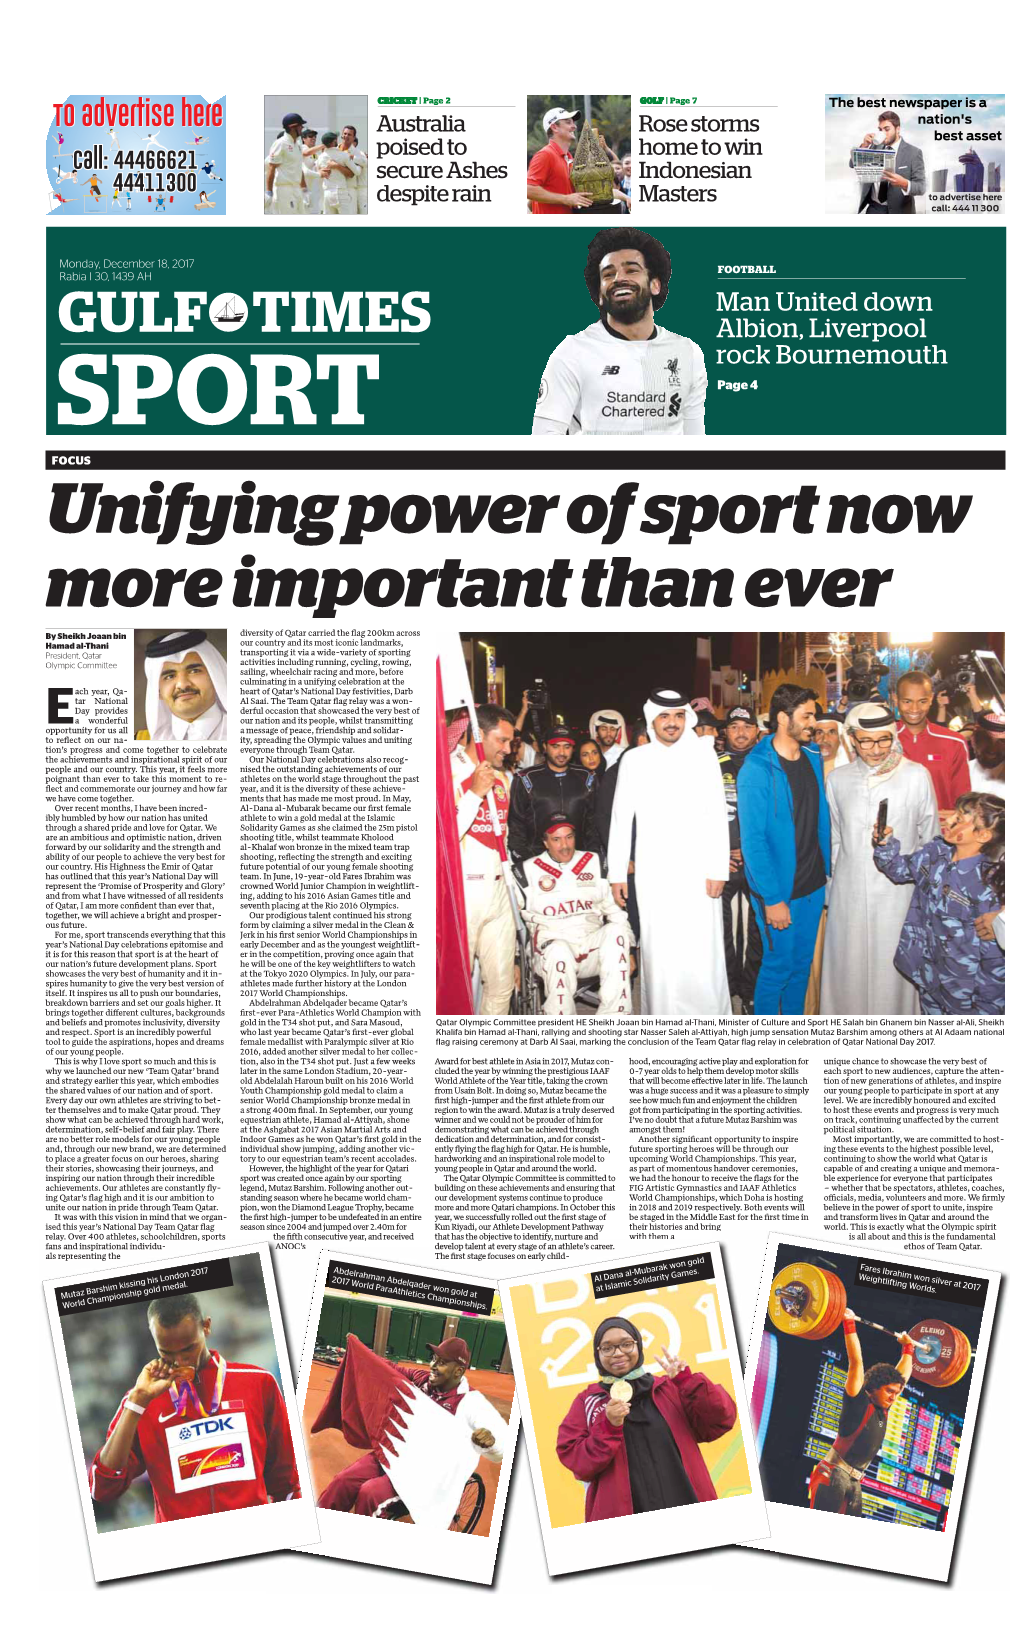 Unifying Power of Sport Now More Important Than Ever